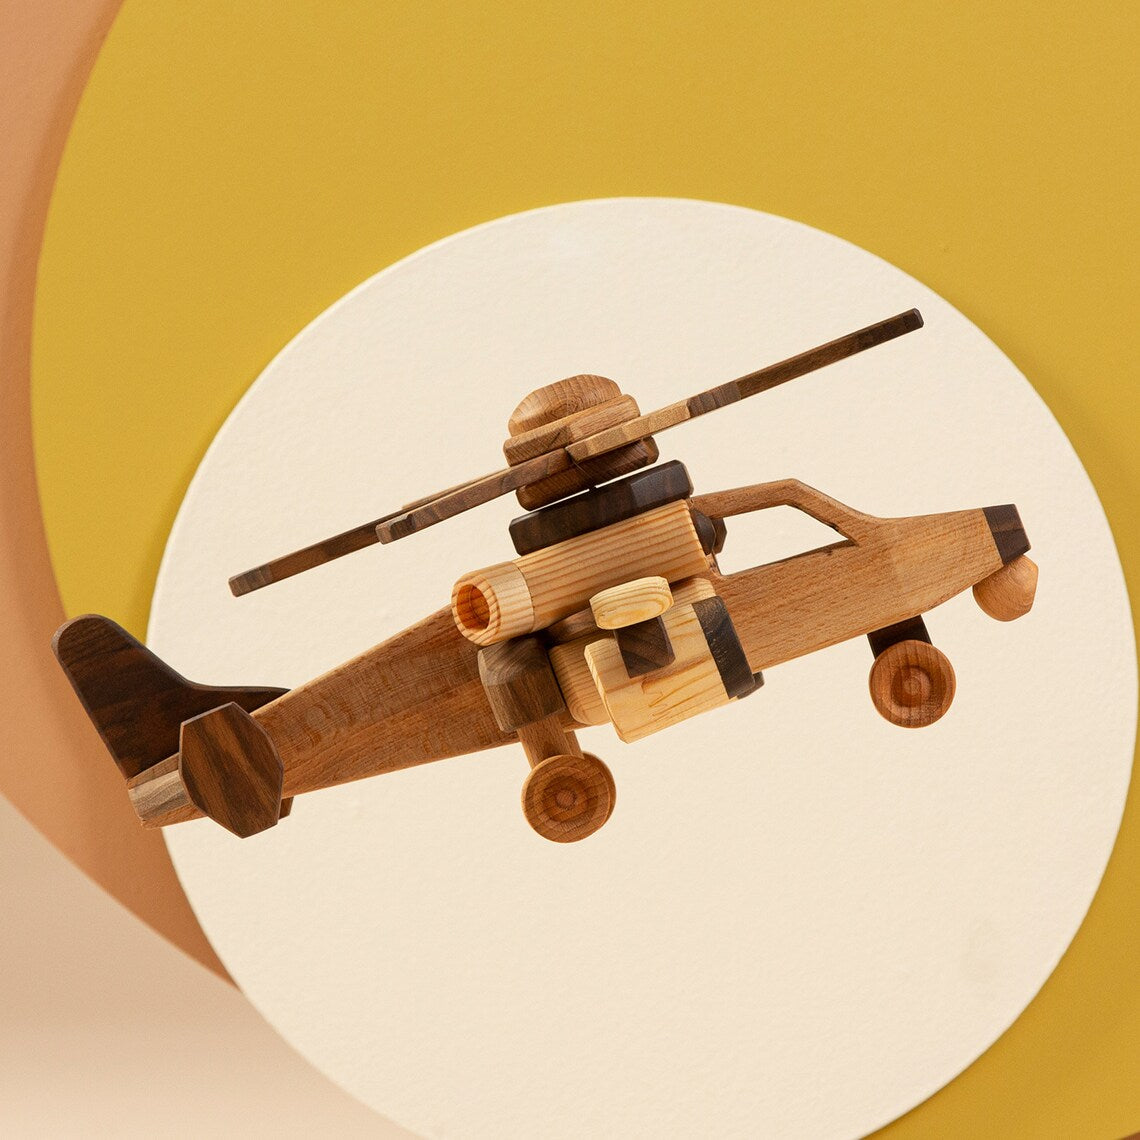 Wooden Toy Large Helicopter